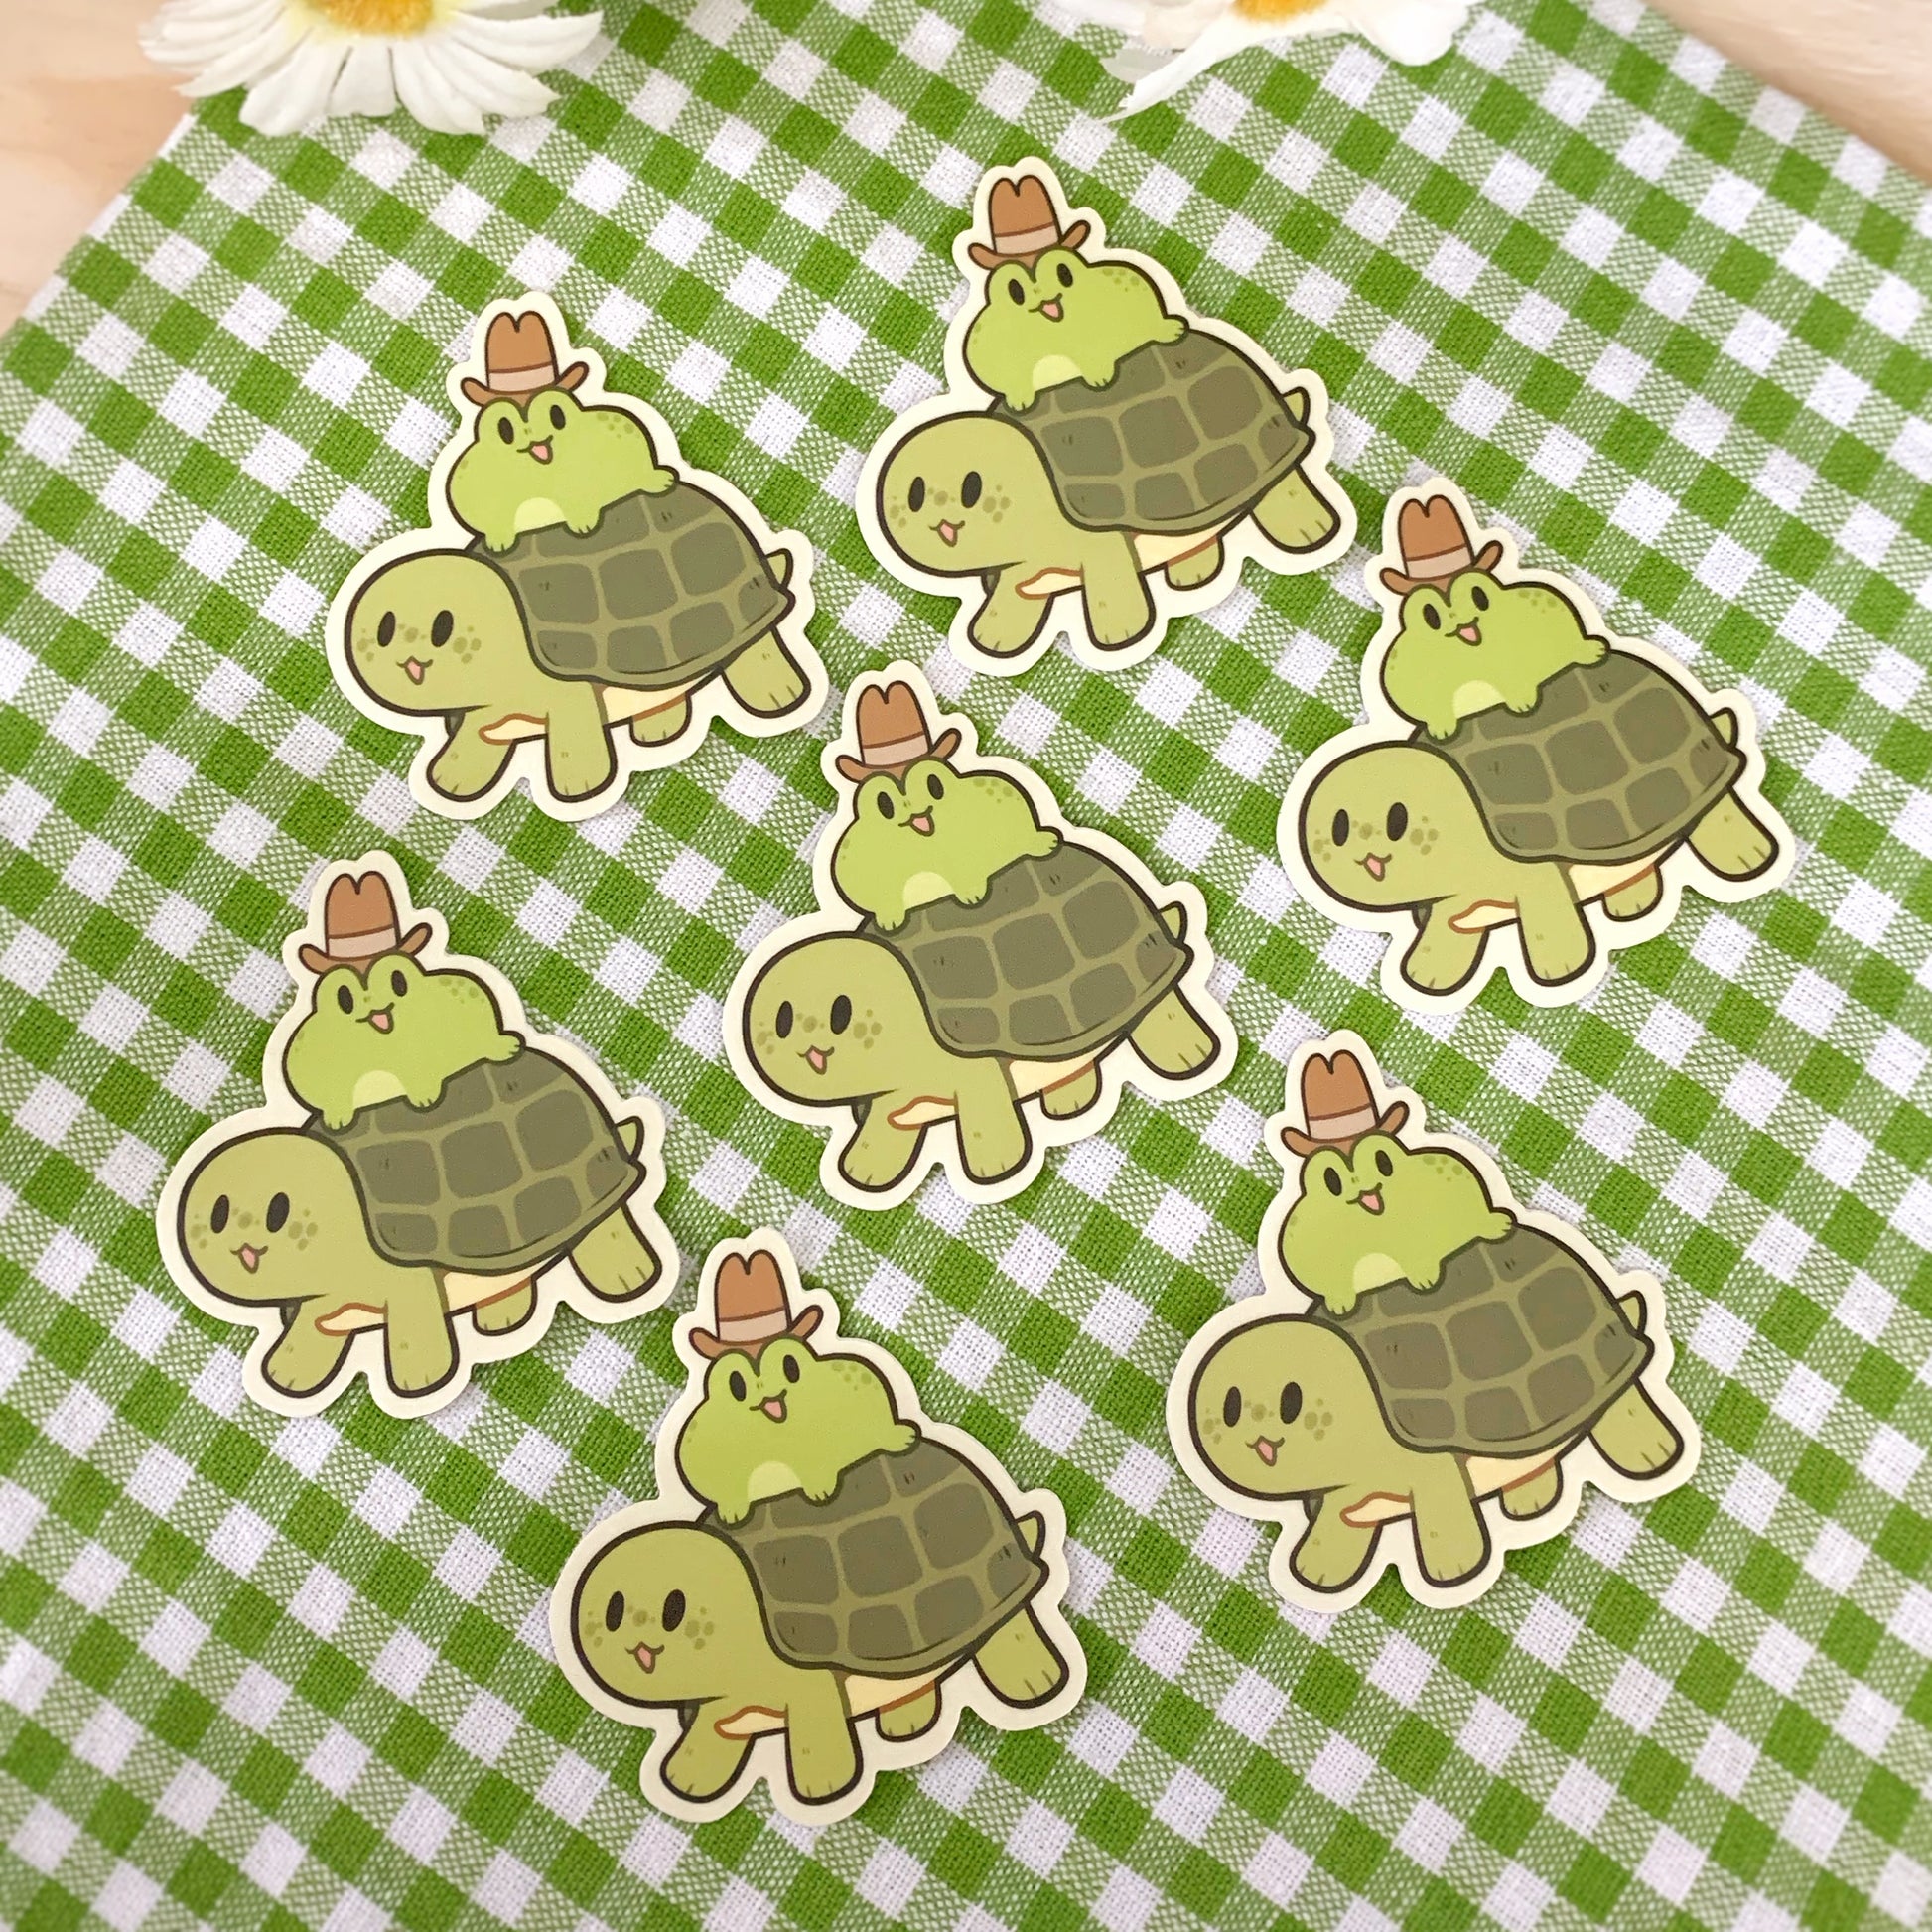 7 vinyl stickers of an illustrated green frog with an open mouth smile wearing a tall brow cowboy hat, riding a green turtle with an open smile. Photographed against a green and white gingham cloth.